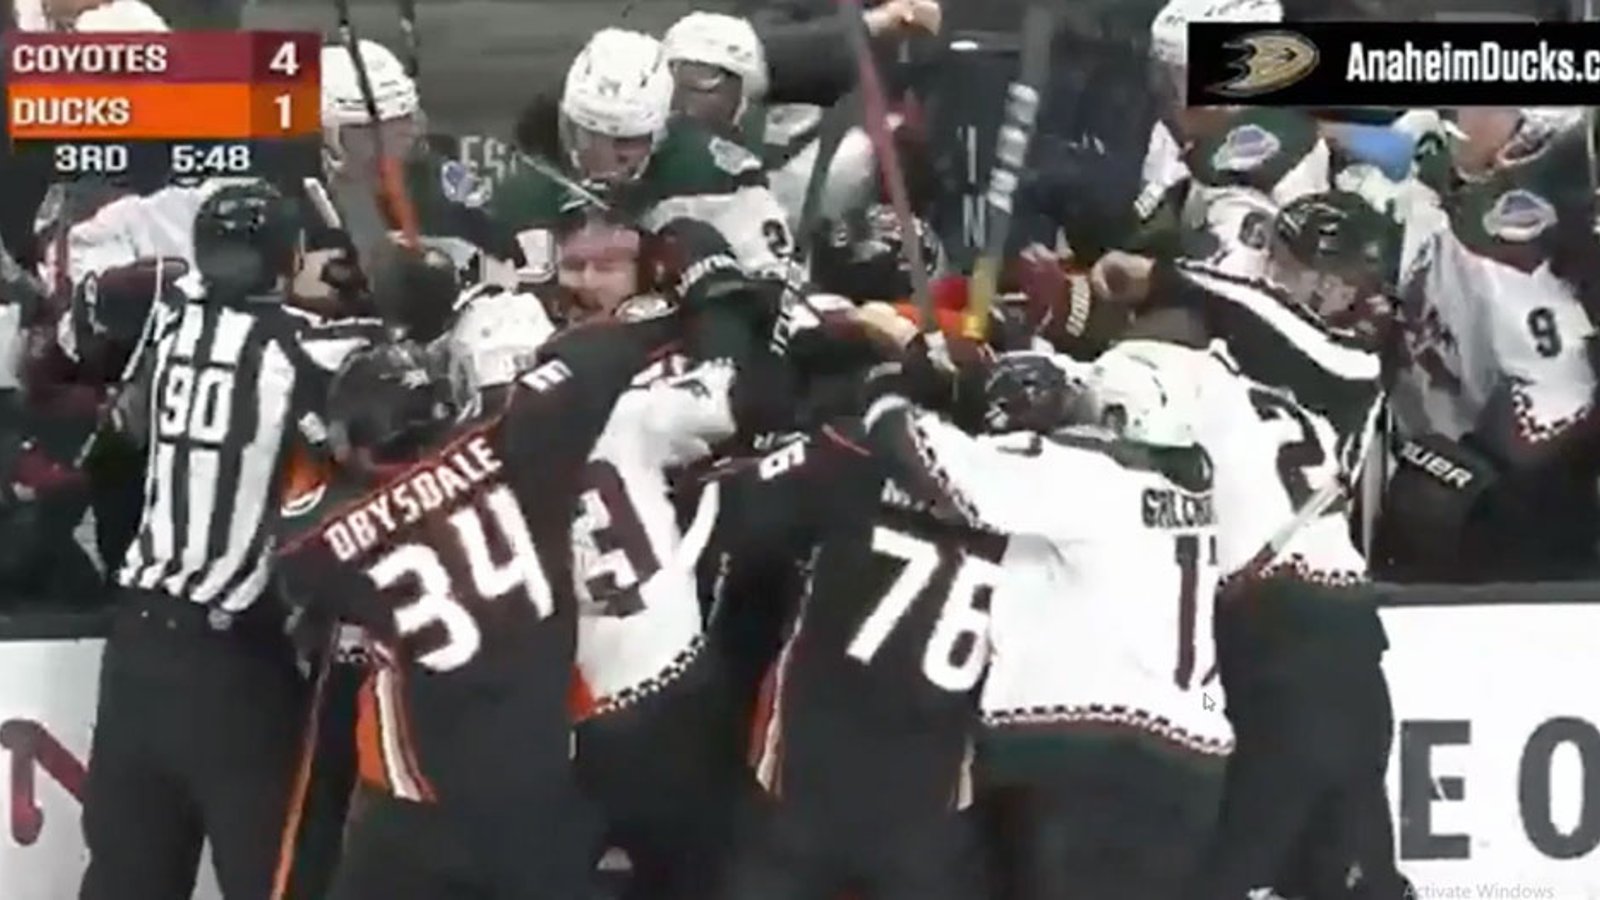 Ducks players start throwing punches at Coyotes bench and all Hell breaks loose!